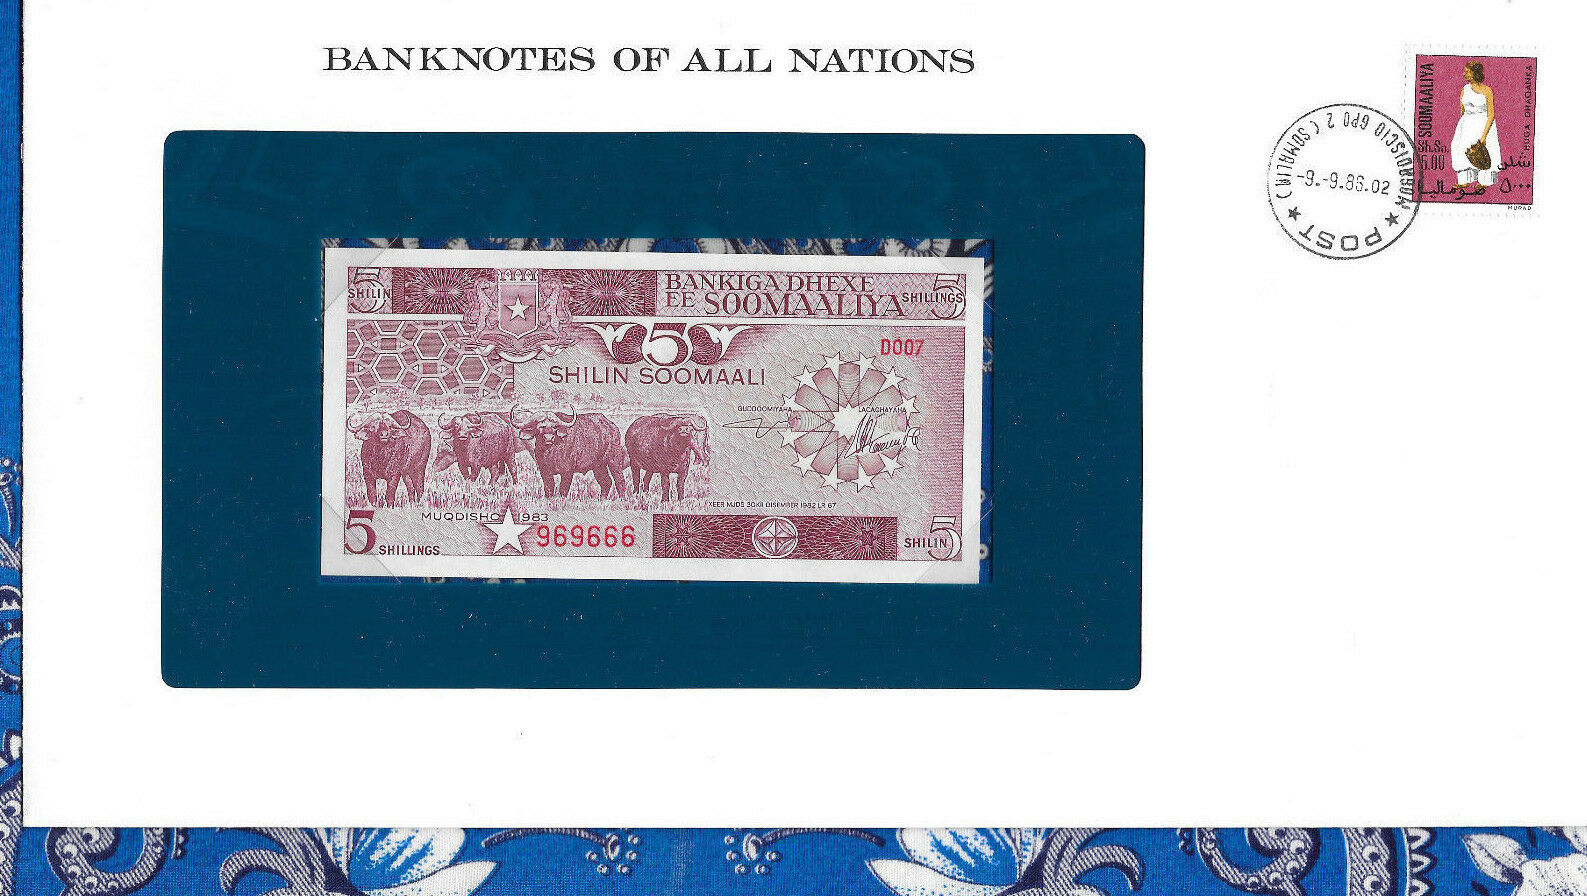 Banknotes Of All Nations Somalia 1983 5 Shillings P-31a Unc D007 Fancy 969666